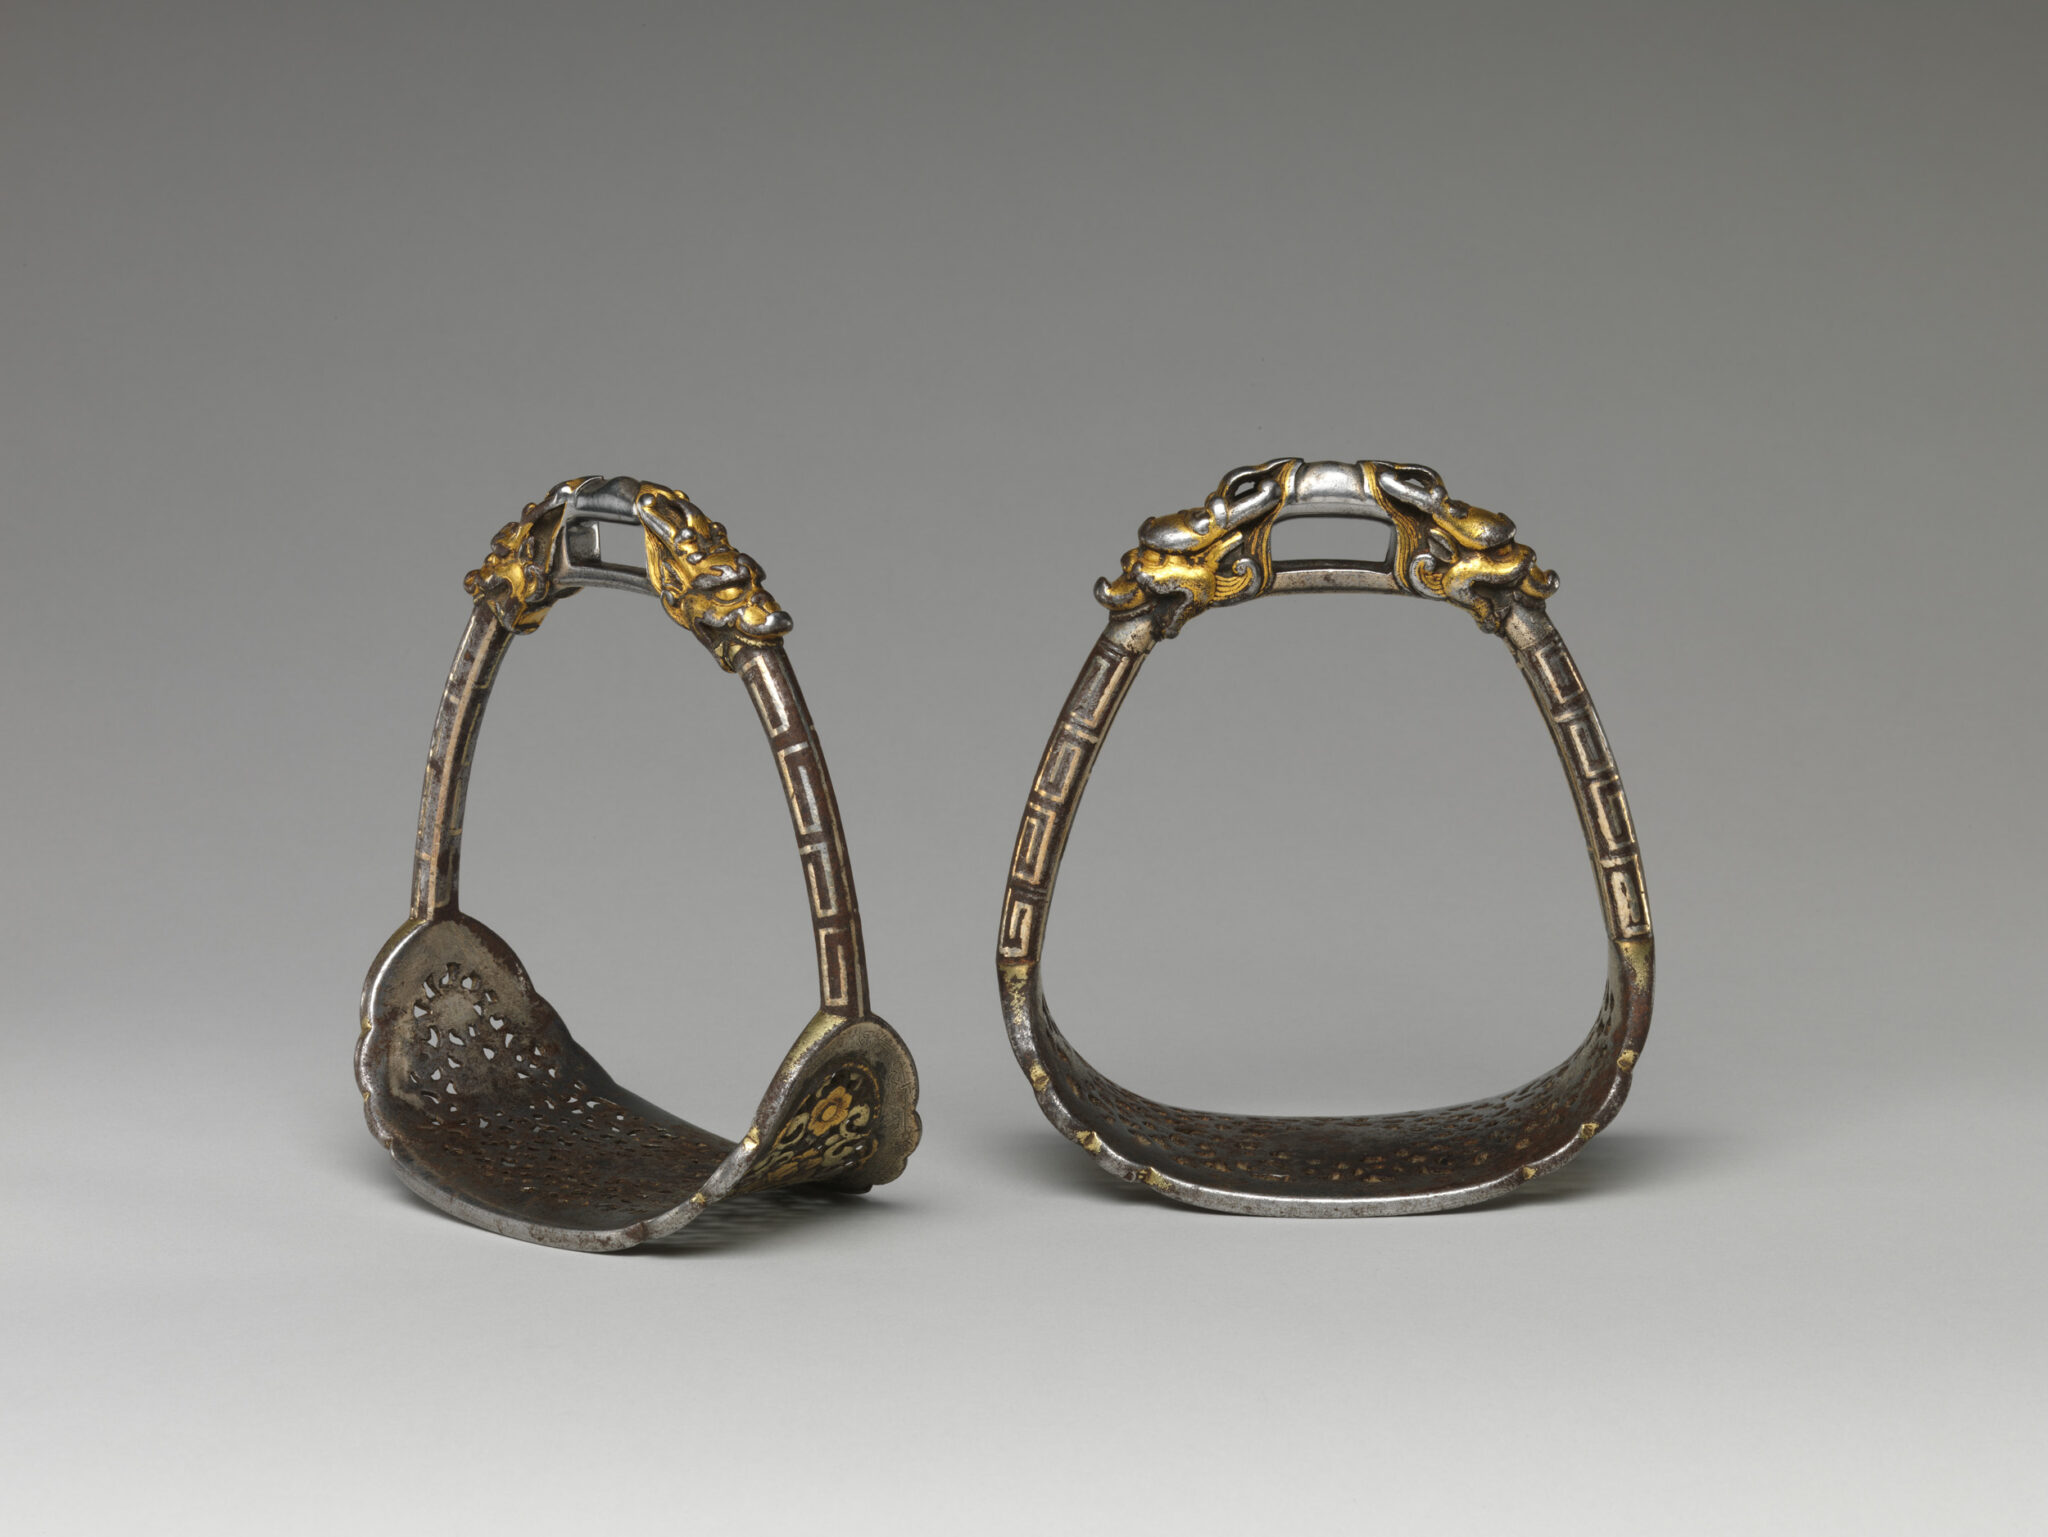 Two oblong silver stirrups featuring details and decoration in gold; footbeds pierced with small holes